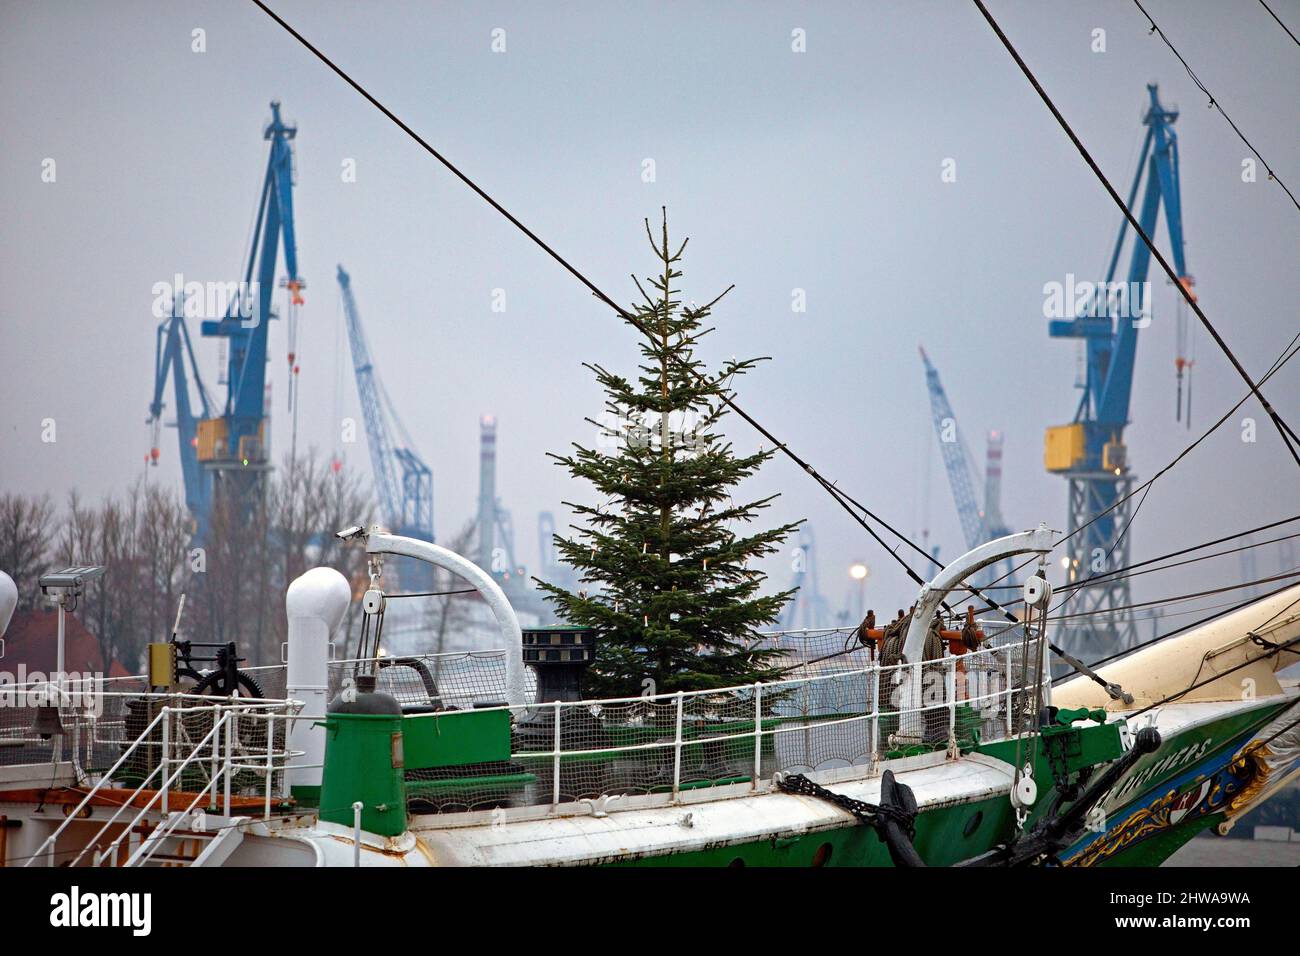 Christmas tree on mueseum ship Rickmer Rickmers and harbour cranes in the background, Germany, Hamburg Stock Photo